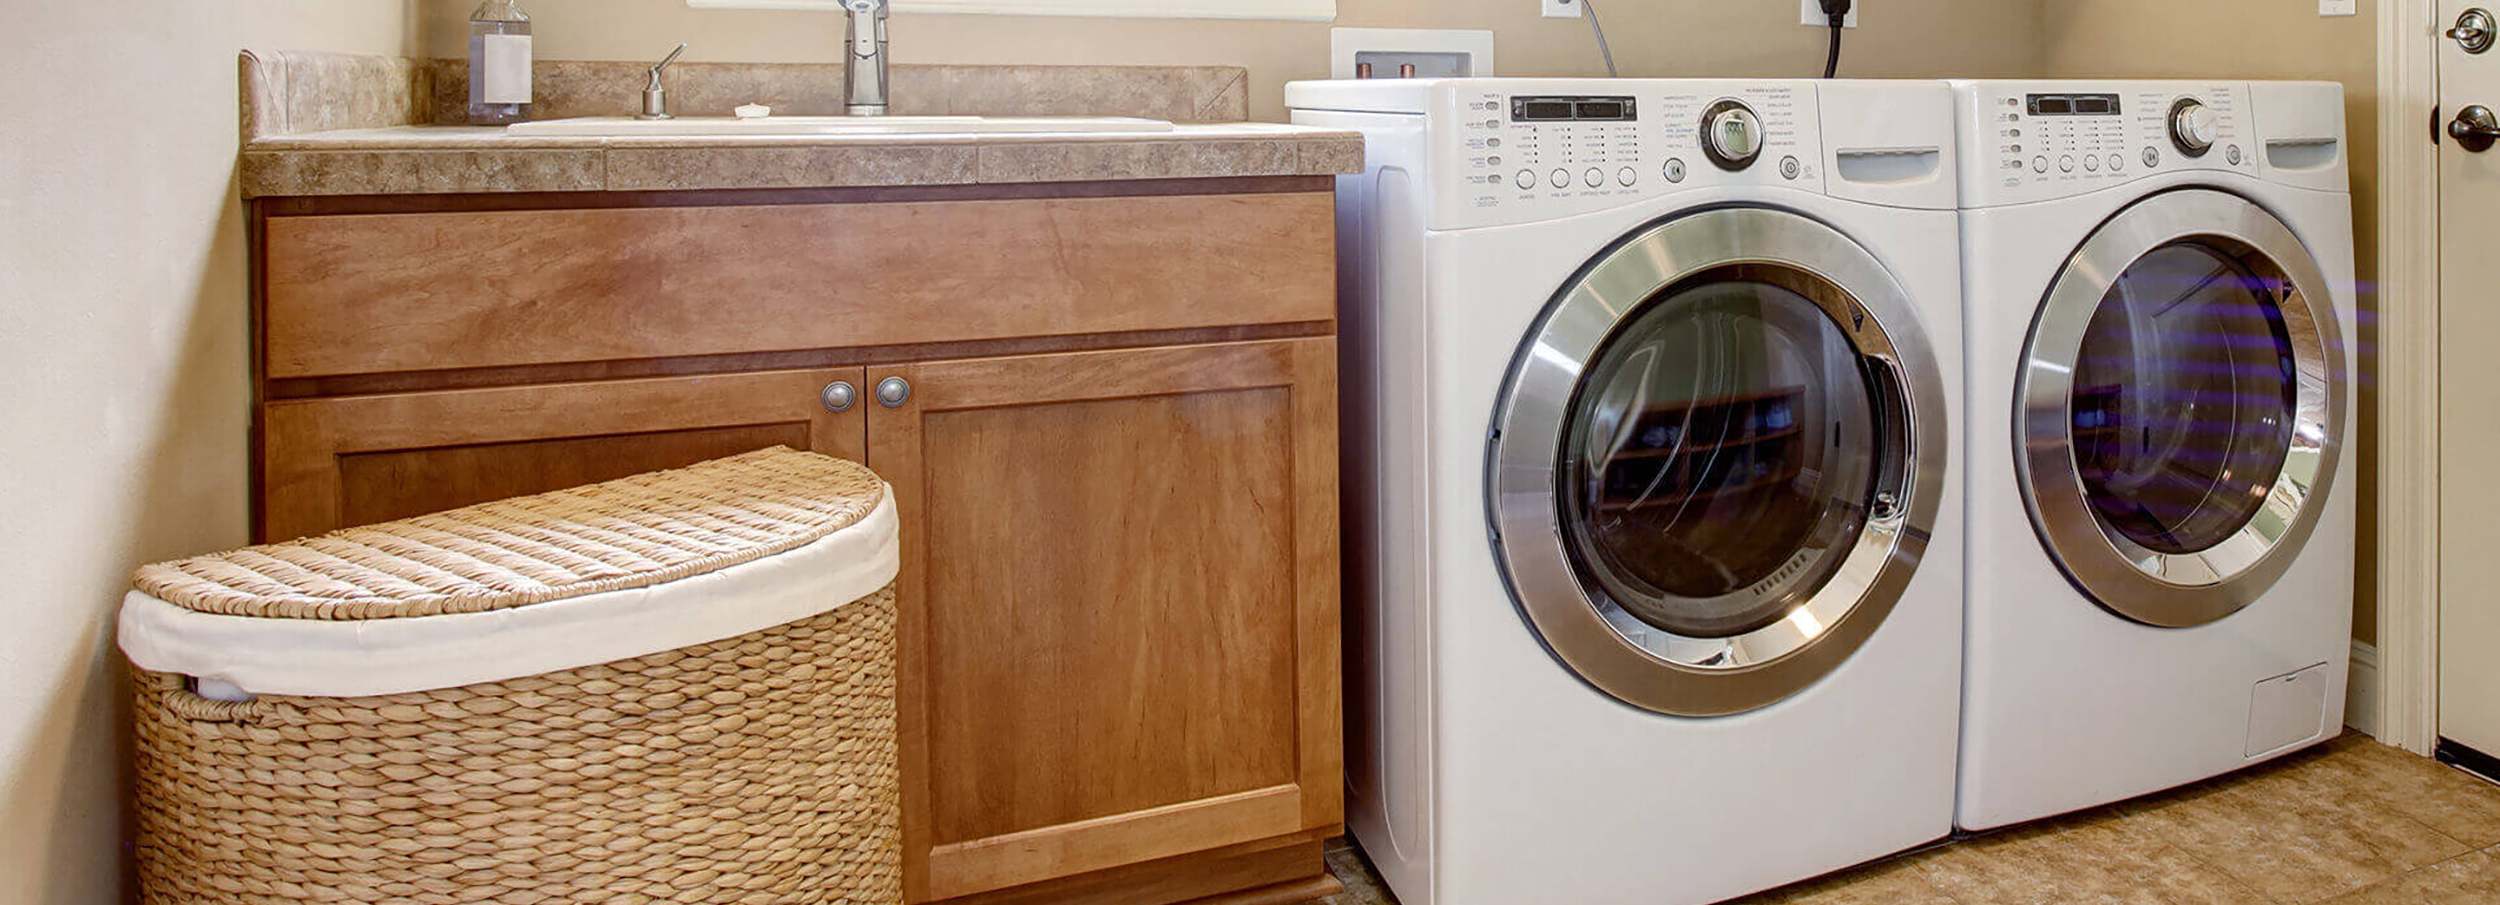 White washing machine and dryer beside sink in tidy home laundry room.